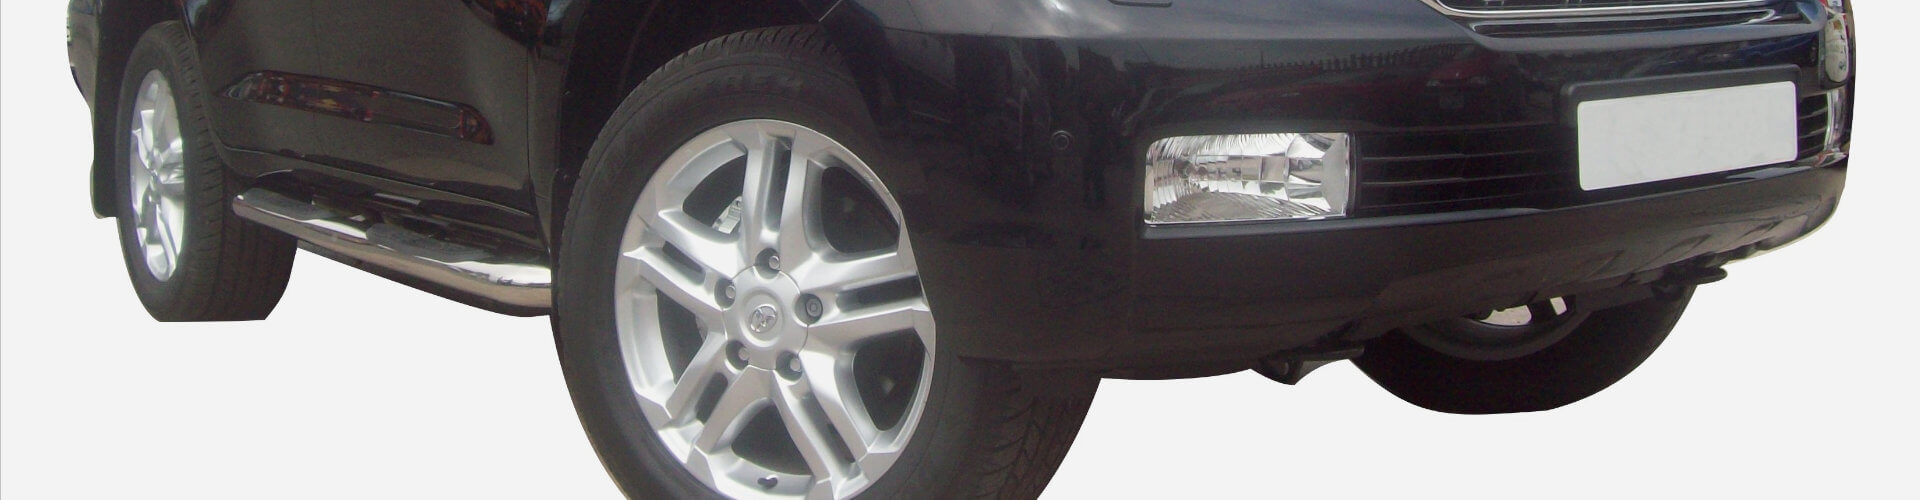 Direct4x4 Accessories UK | Toyota Side Steps, Side Bars & Running Boards